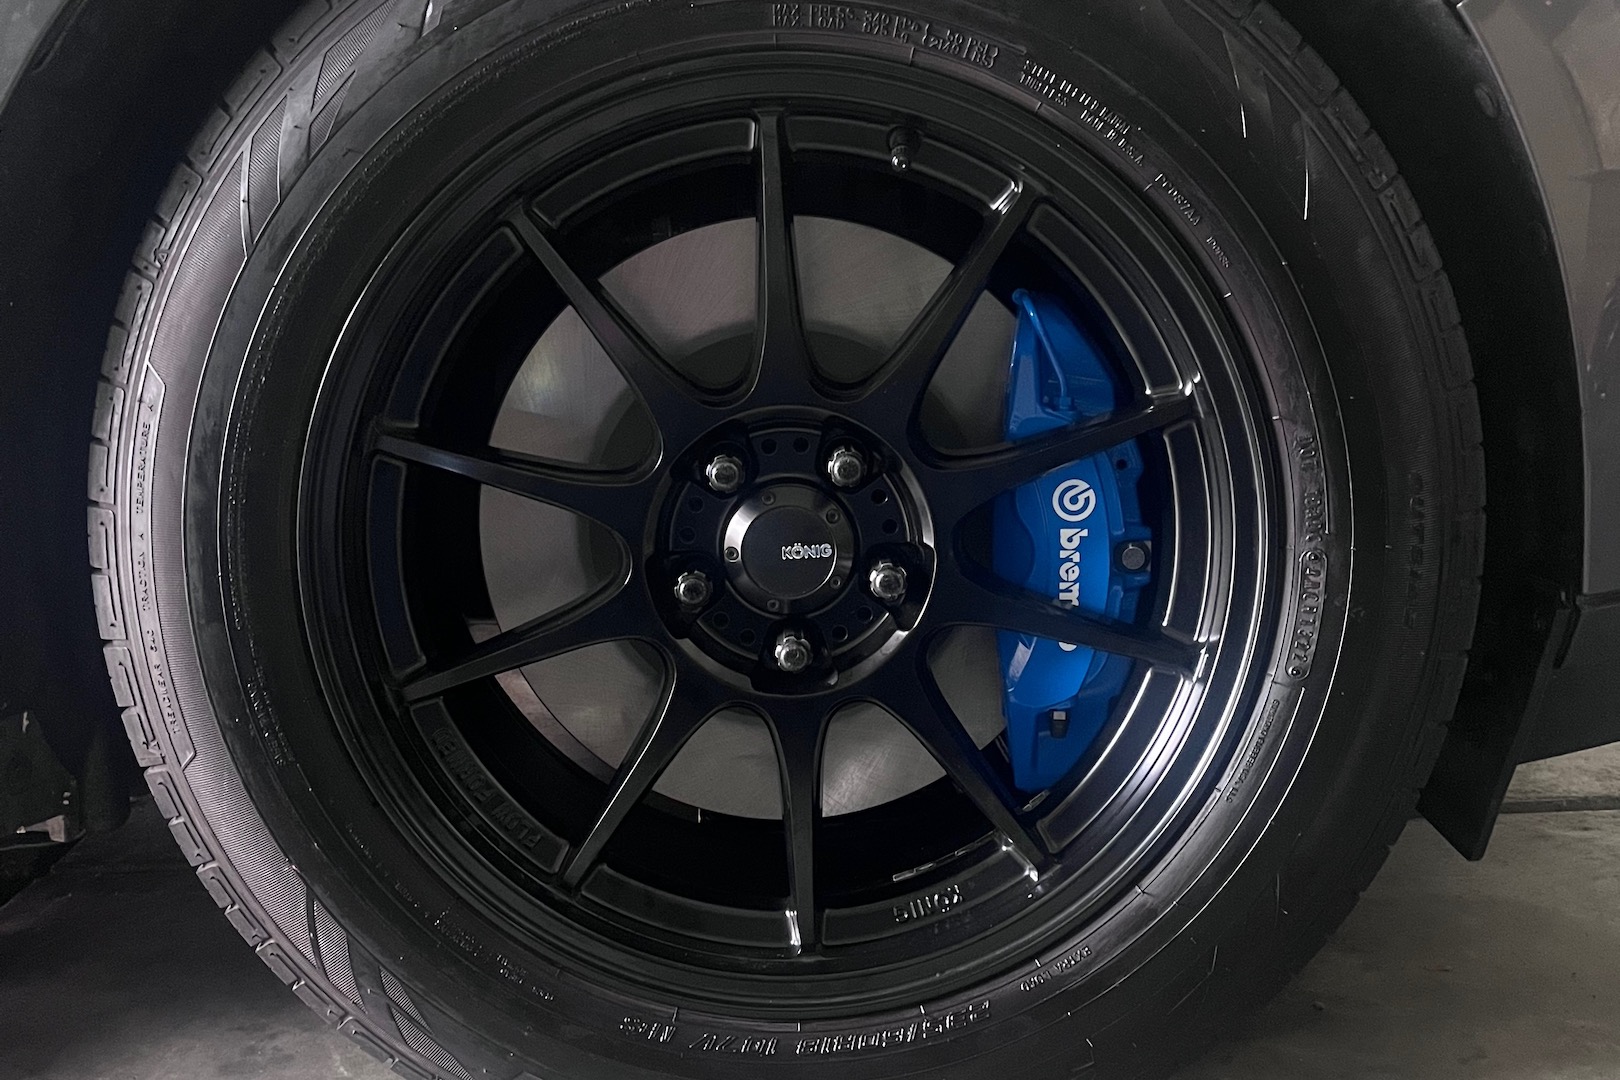 Ford Focus RS Brembo brakes on a Maverick